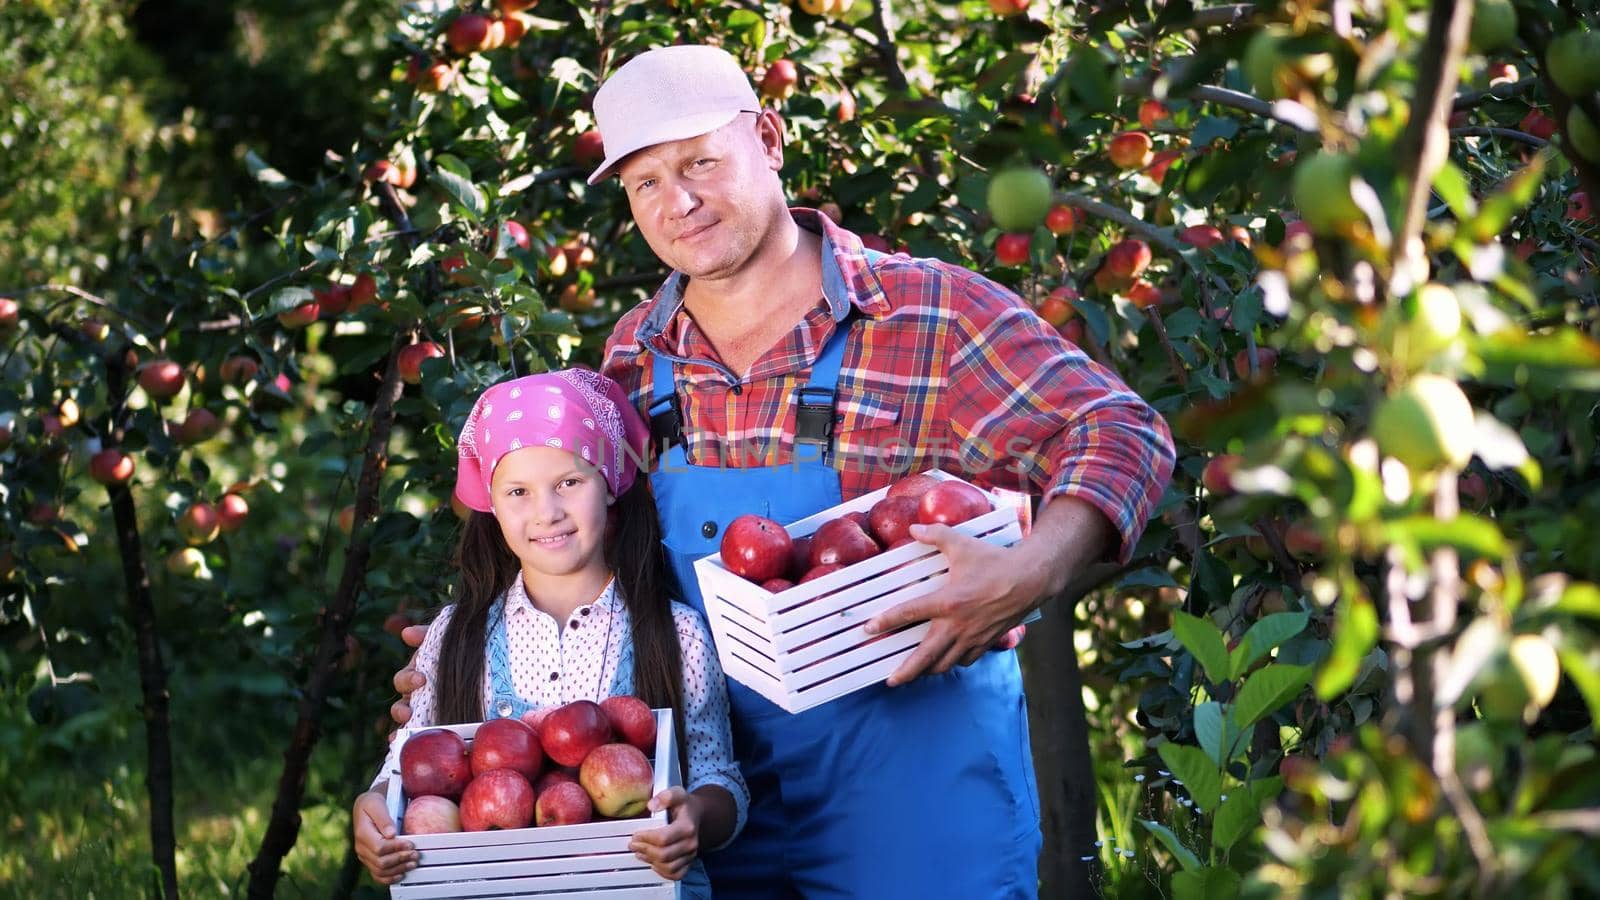 picking apples on farm, in garden. on hot, sunny autumn day. portrait of family of farmers, dad and daughter holding in their hands wooden boxes with red ripe organic apples, smiling, by djtreneryay